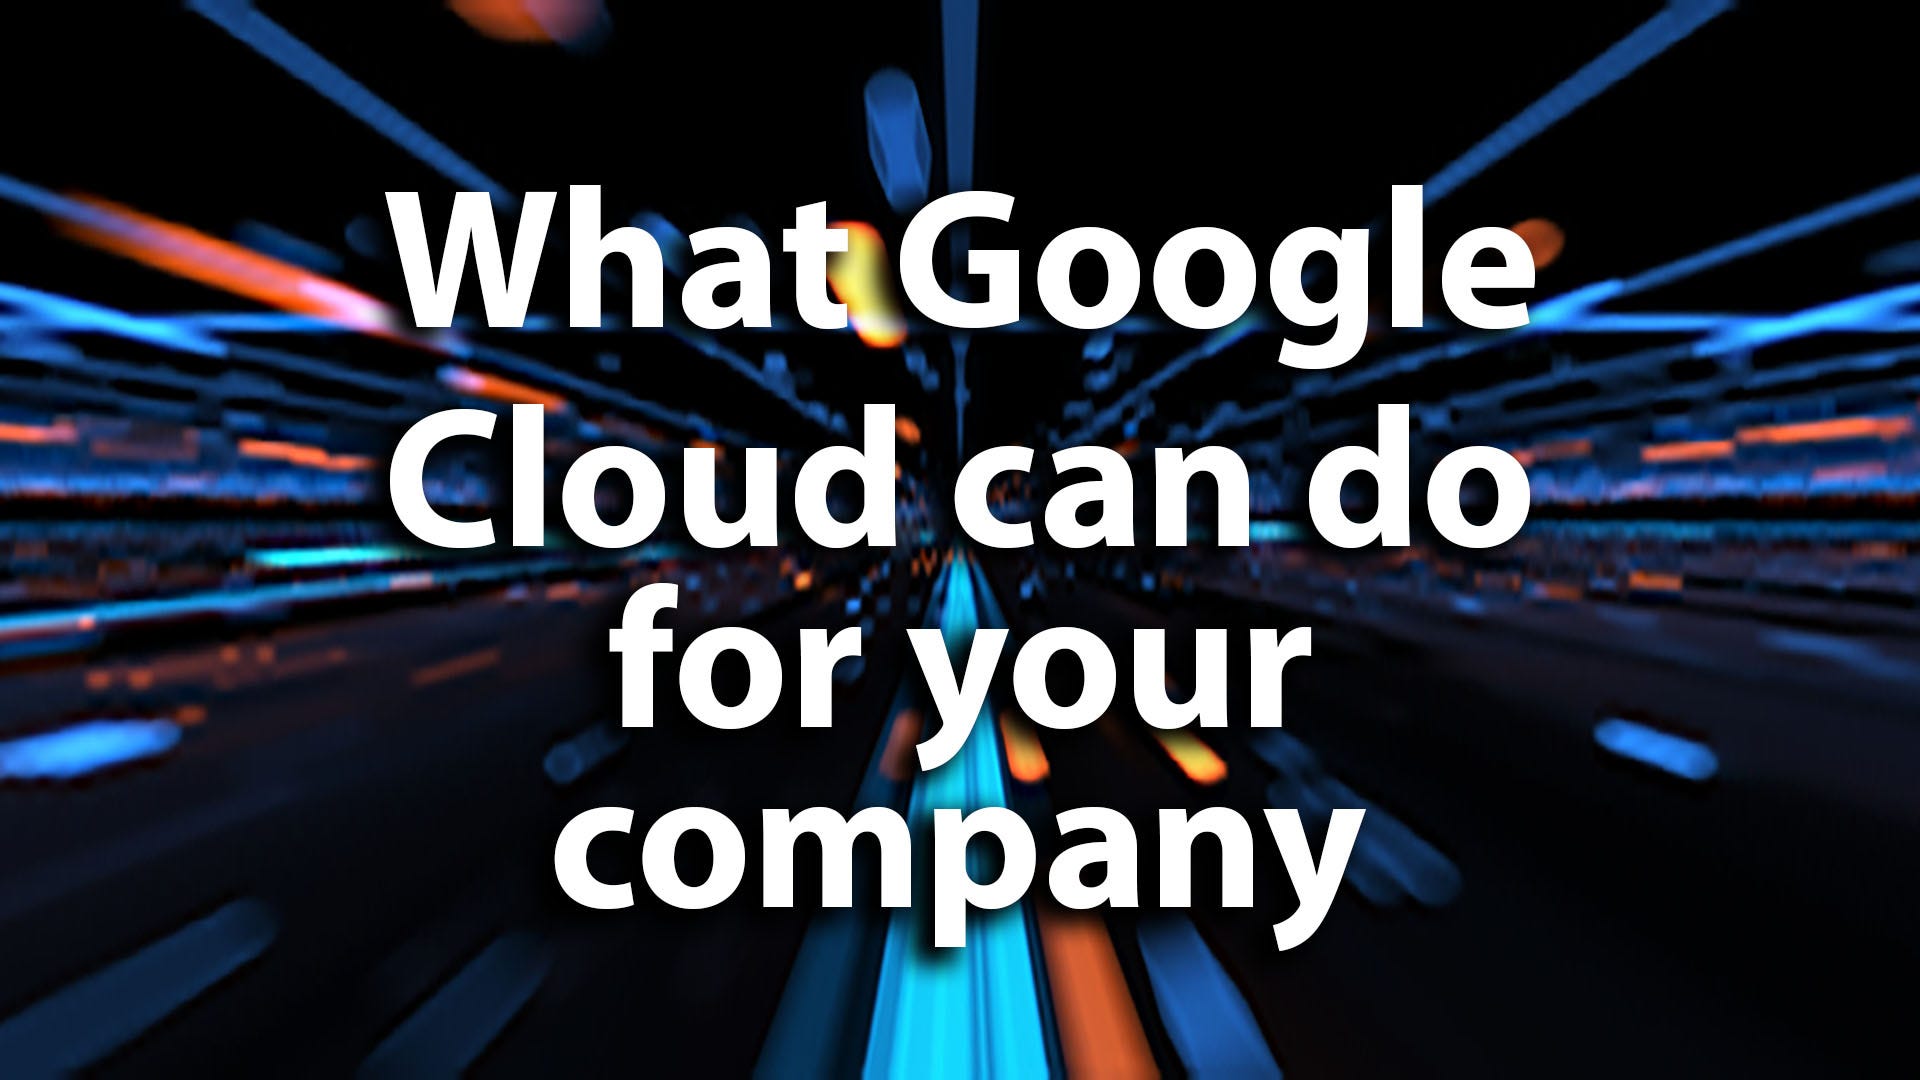 What Google Cloud can do for your company